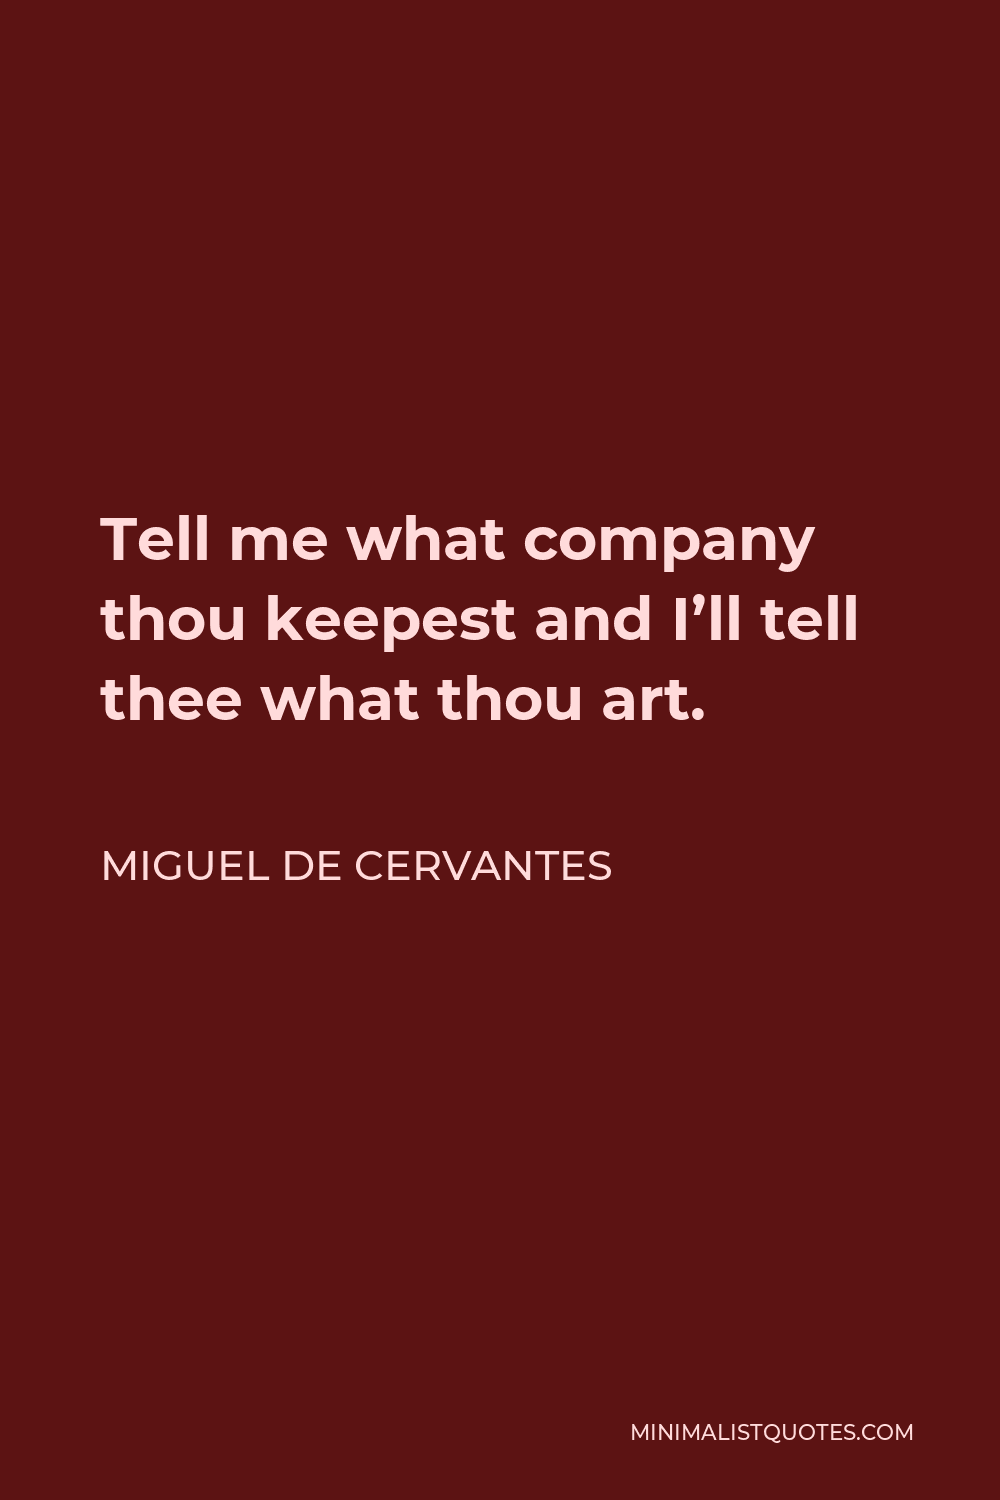 Miguel de Cervantes Quote - Tell me what company thou keepest and I’ll tell thee what thou art.